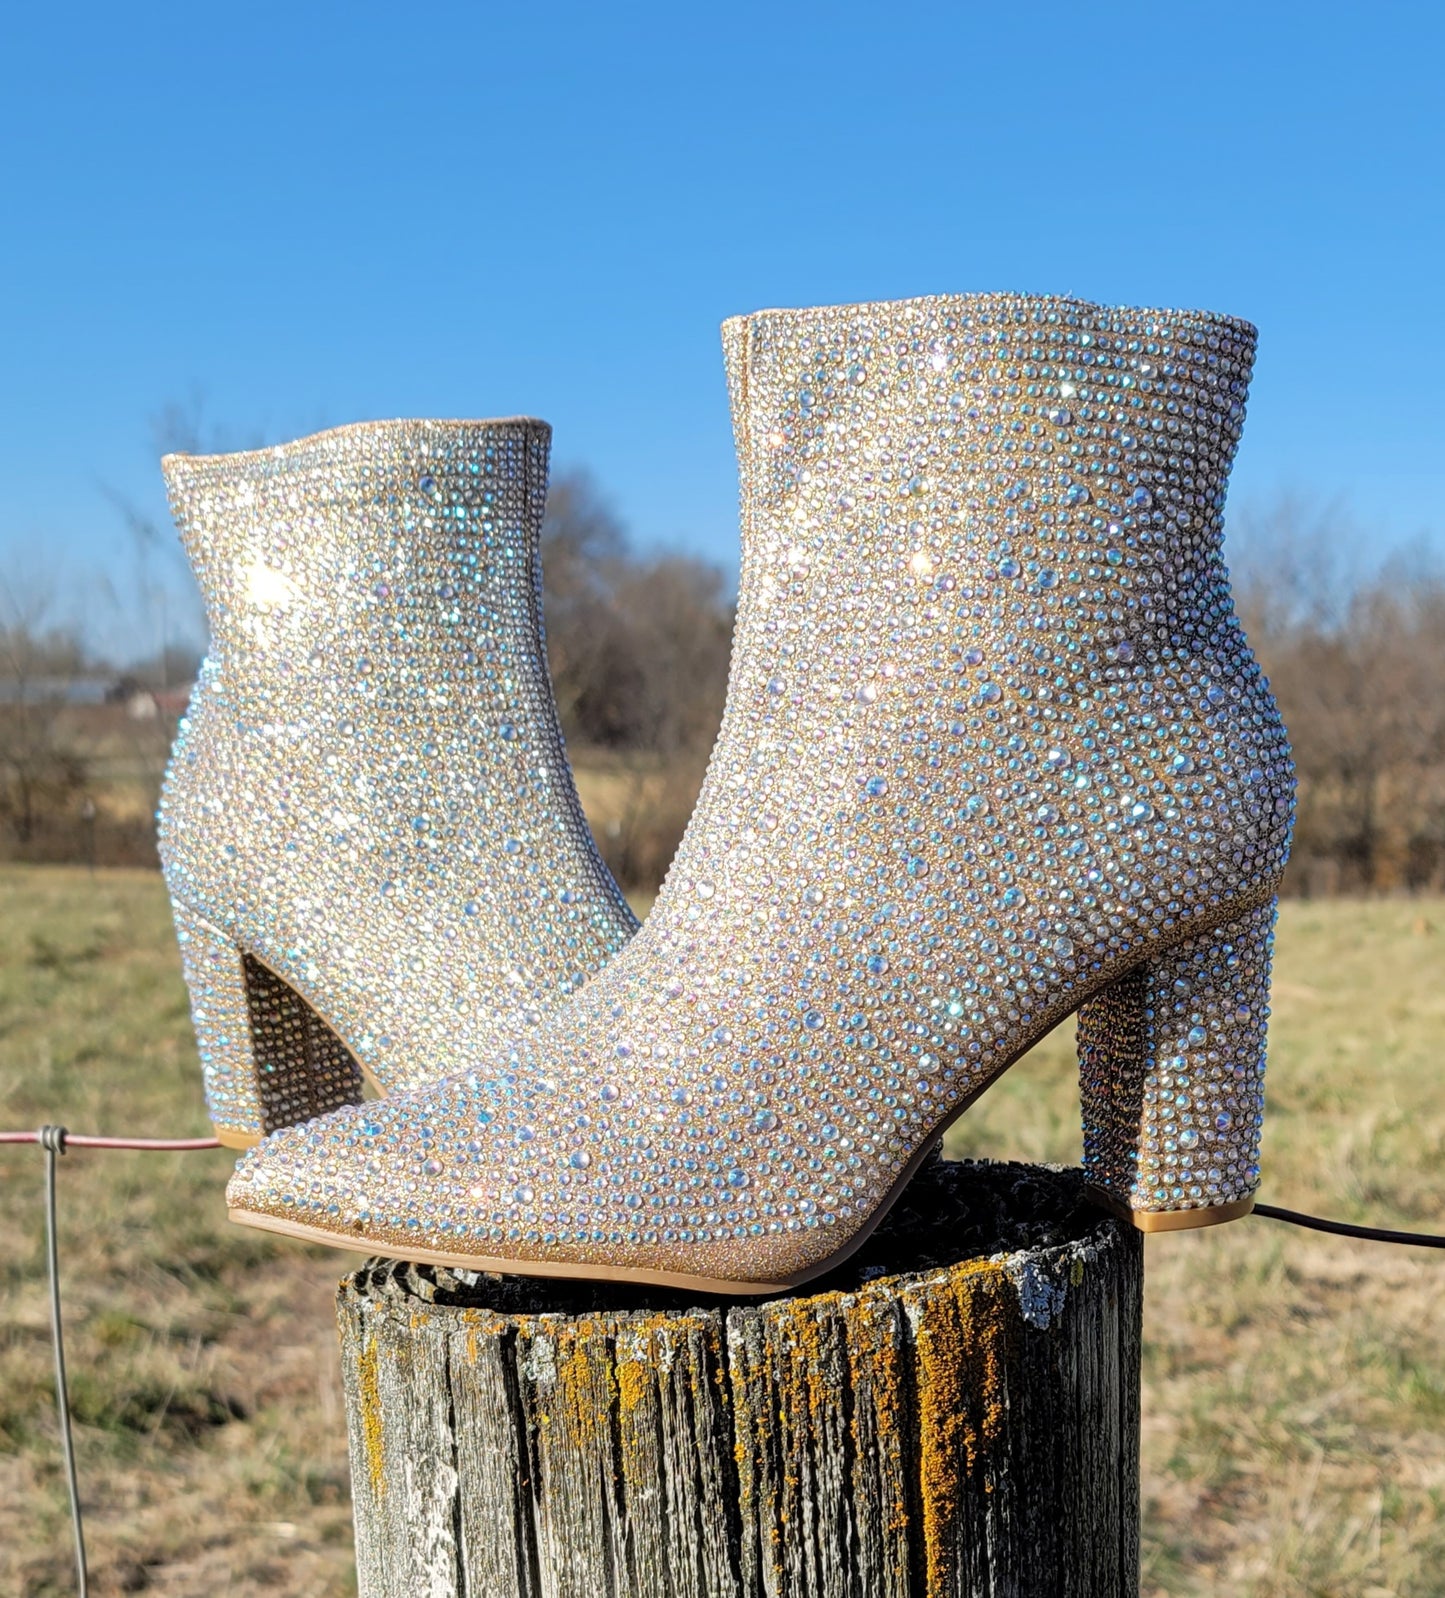 Glam it up Rhinestone bootiess. CHAMPAGNE OR SILVER